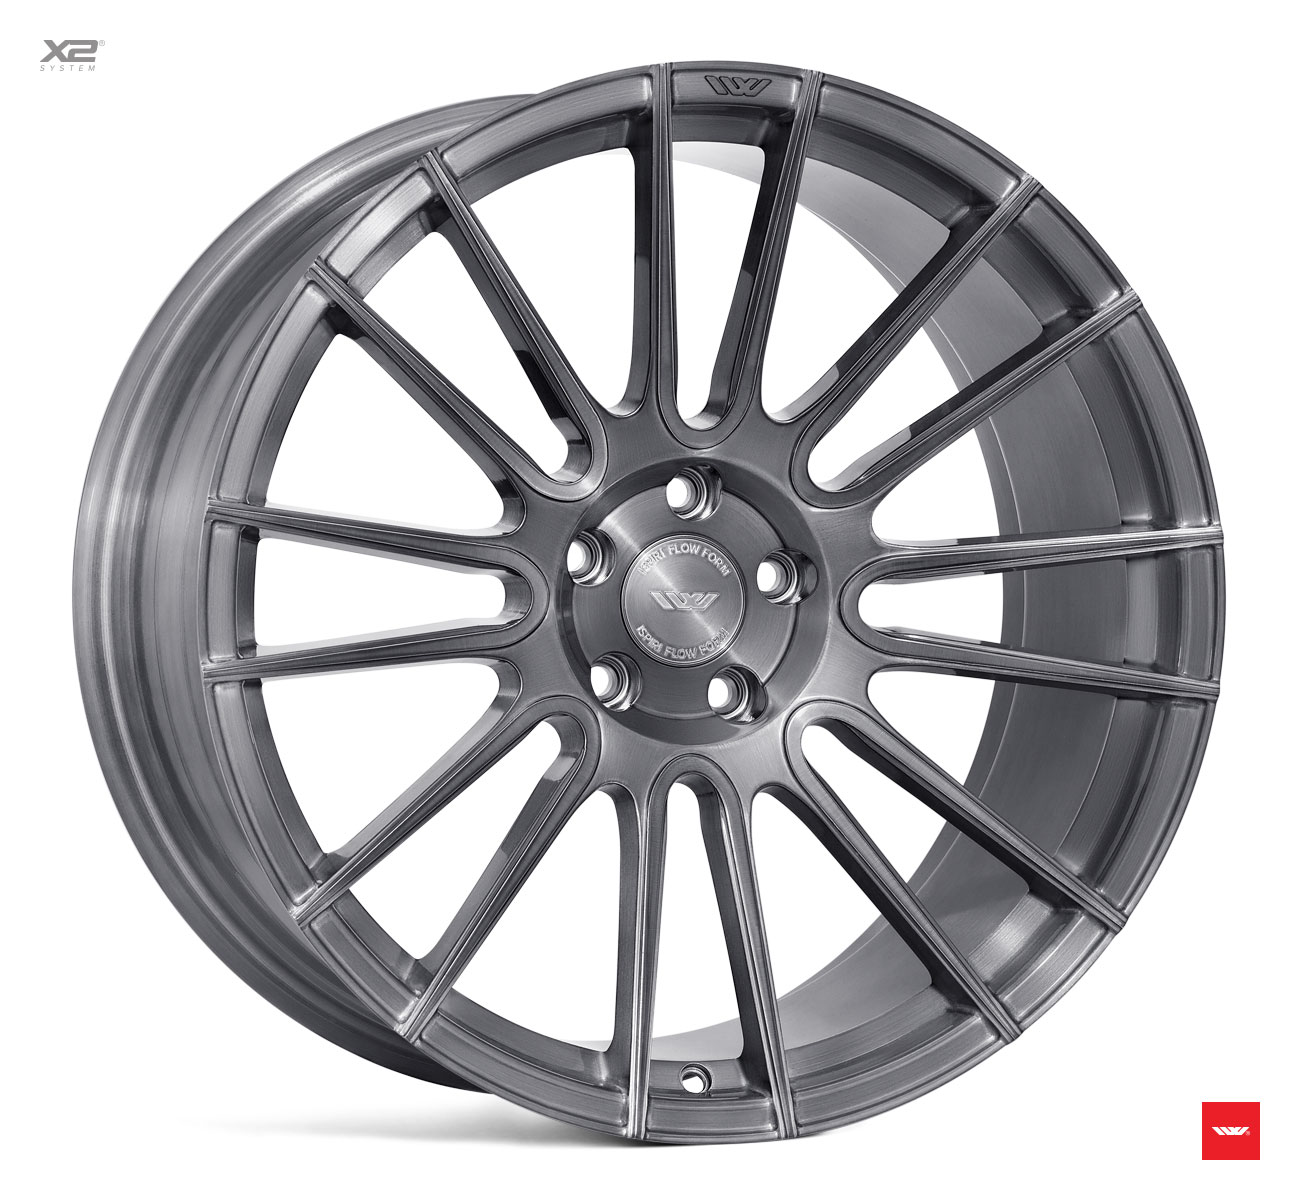 NEW 20" ISPIRI FFR8 8-TWIN CURVED SPOKE ALLOY WHEELS IN FULL BRUSHED CARBON TITANIUM, VARIOUS FITMENTS AVAILABLE